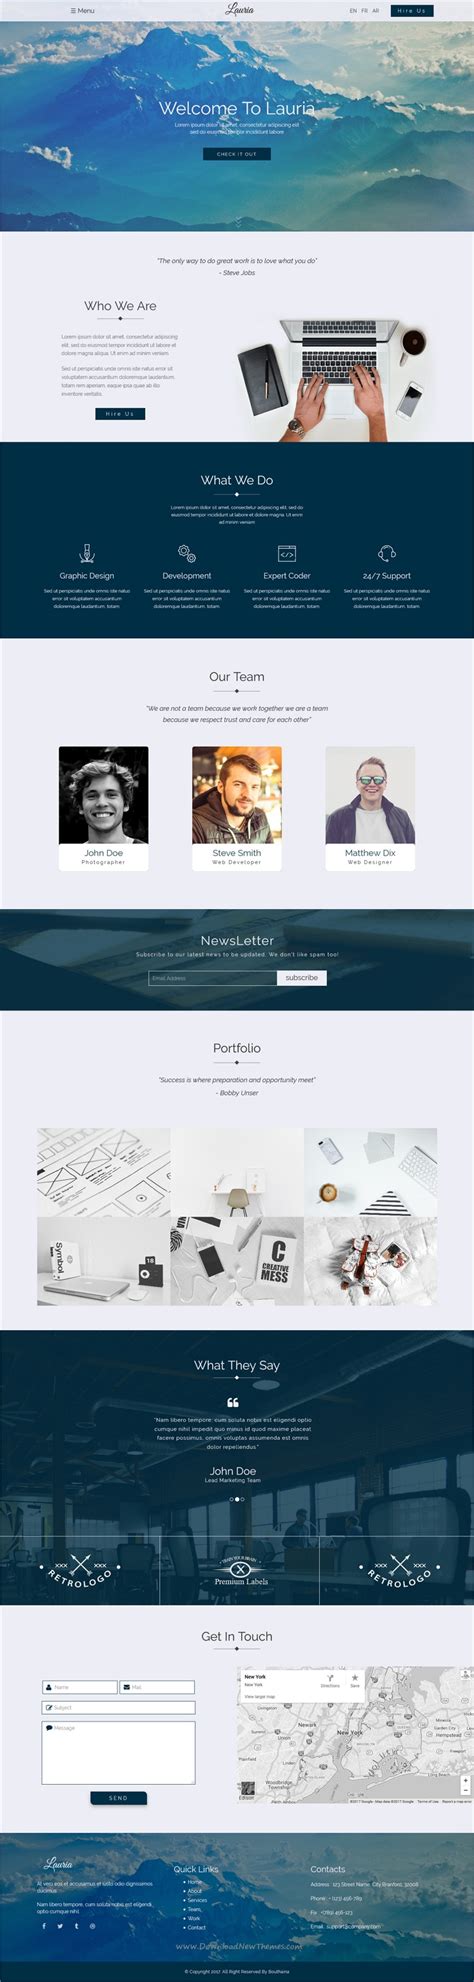 Professional design cv resume word. lauria is modern and creative design responsive #HTML5 #bootstrap template for onepage # ...